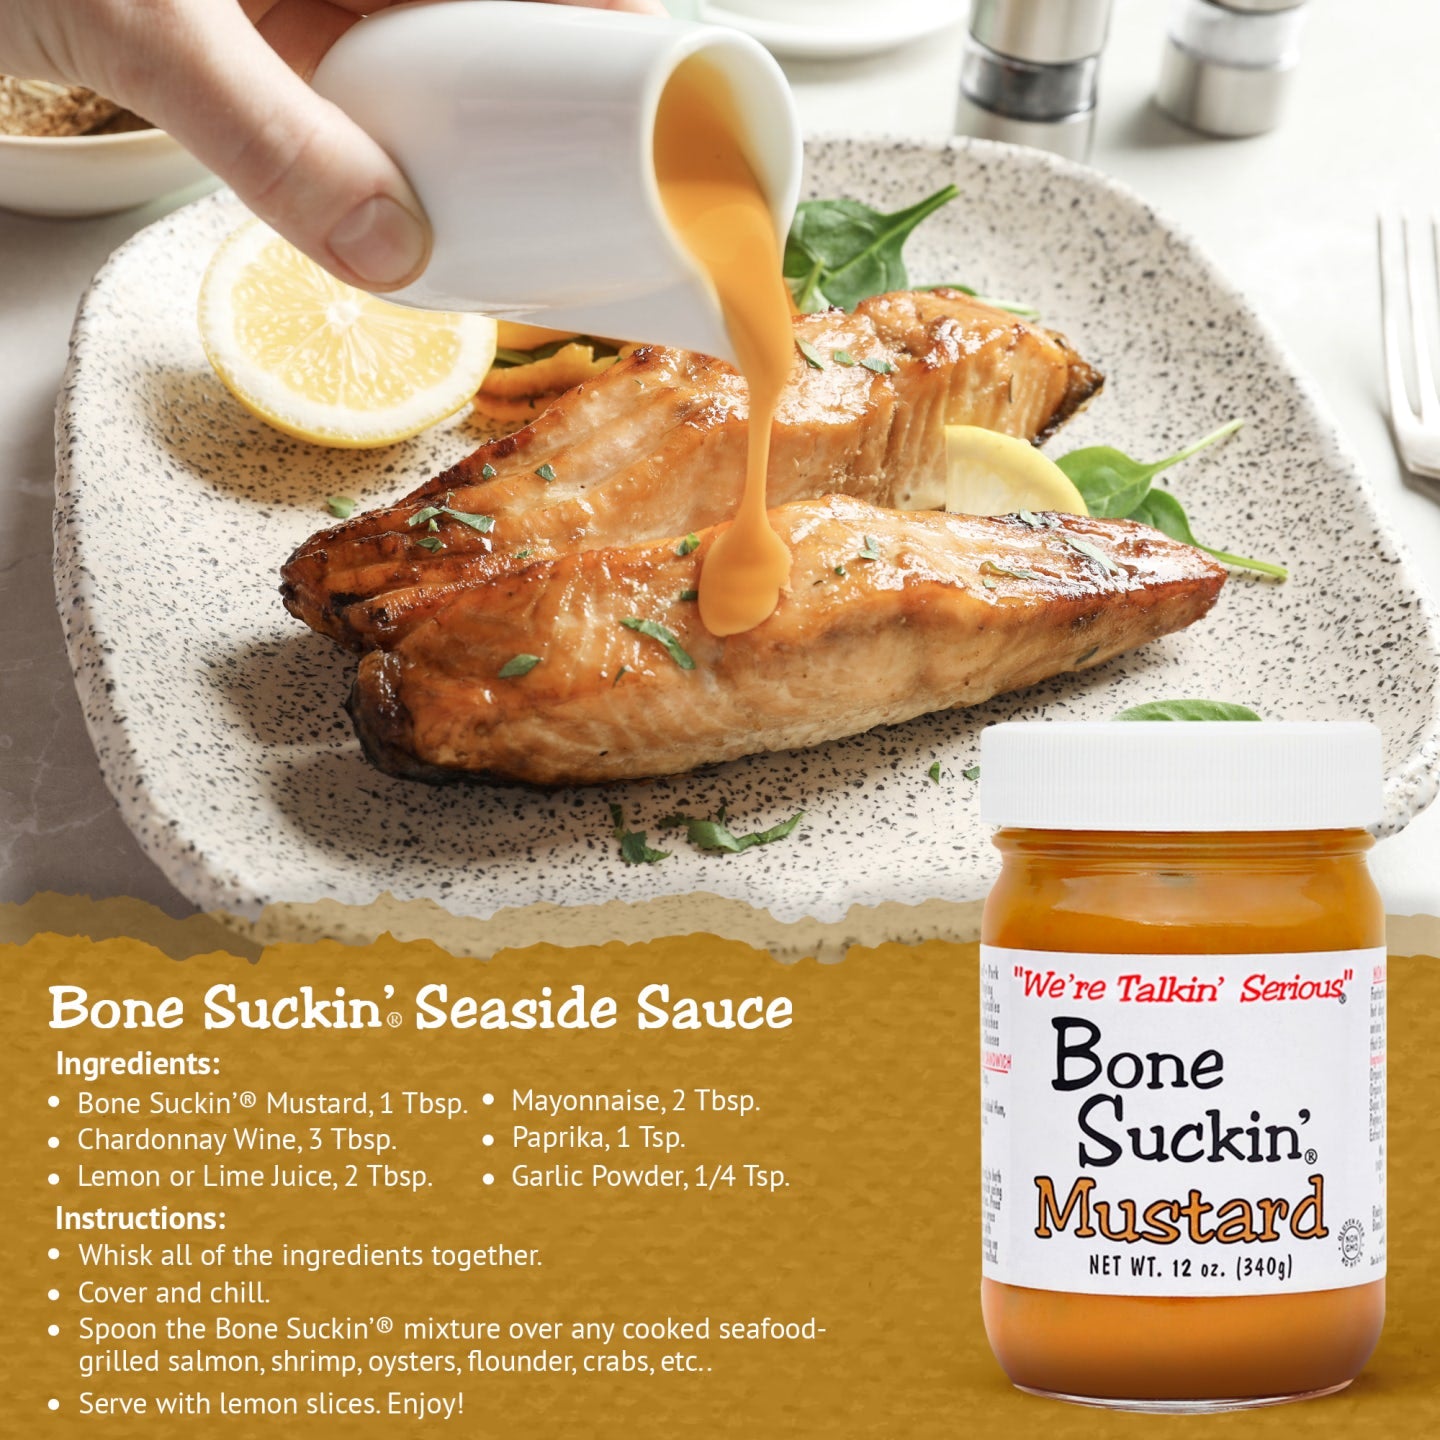 Bone Suckin’® Seaside Sauce Recipe Ingredients Bone Suckin’® Mustard, 1 Tbsp. Chardonnay Wine, 3 Tbsp. Lemon or Lime juice, 2 Tbsp. Mayonnaise, 2 Tbsp. Paprika, 1 Tsp. Garlic Powder, 1/4 Tsp. Instructions Whisk together. Cover and chill. Spoon over any cooked seafood- grilled salmon, shrimp, oysters, flounder, crabs, etc.. Serve with lemon slices.